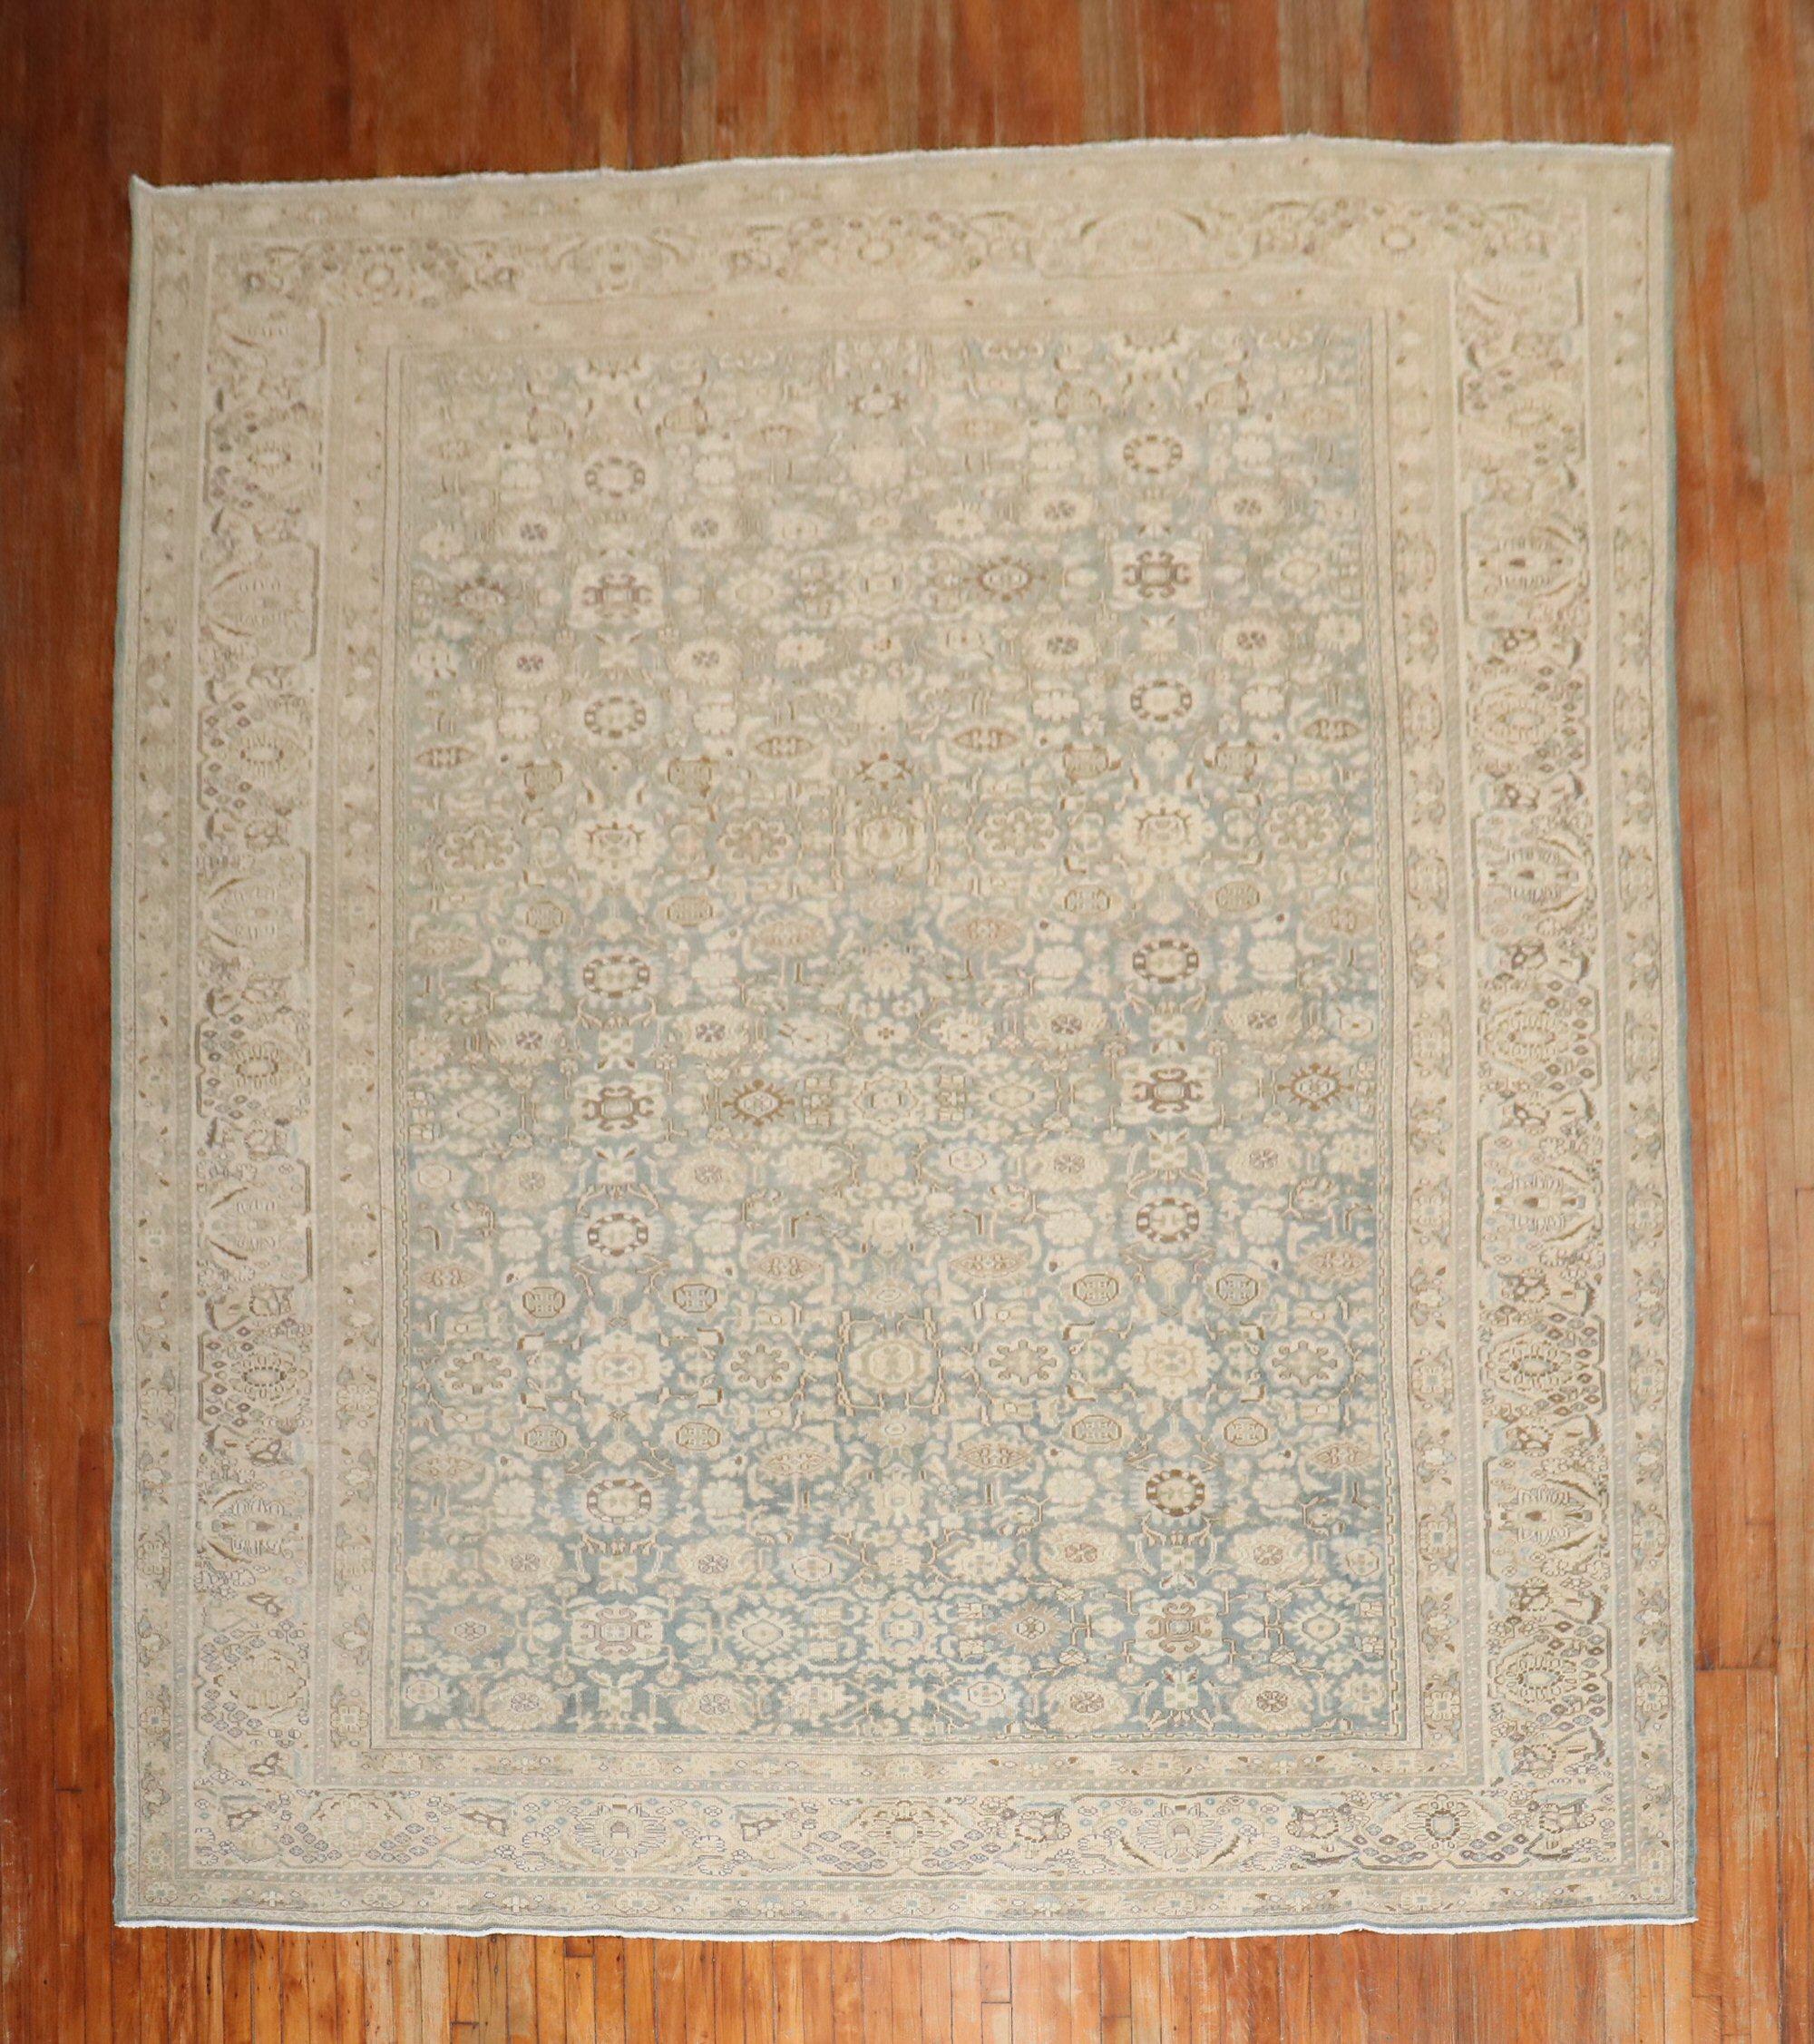 Room size 1930s Persian Malayer Rug. Blue, green beige, sand, khaki

Measures 10'4'' x 13'7''.